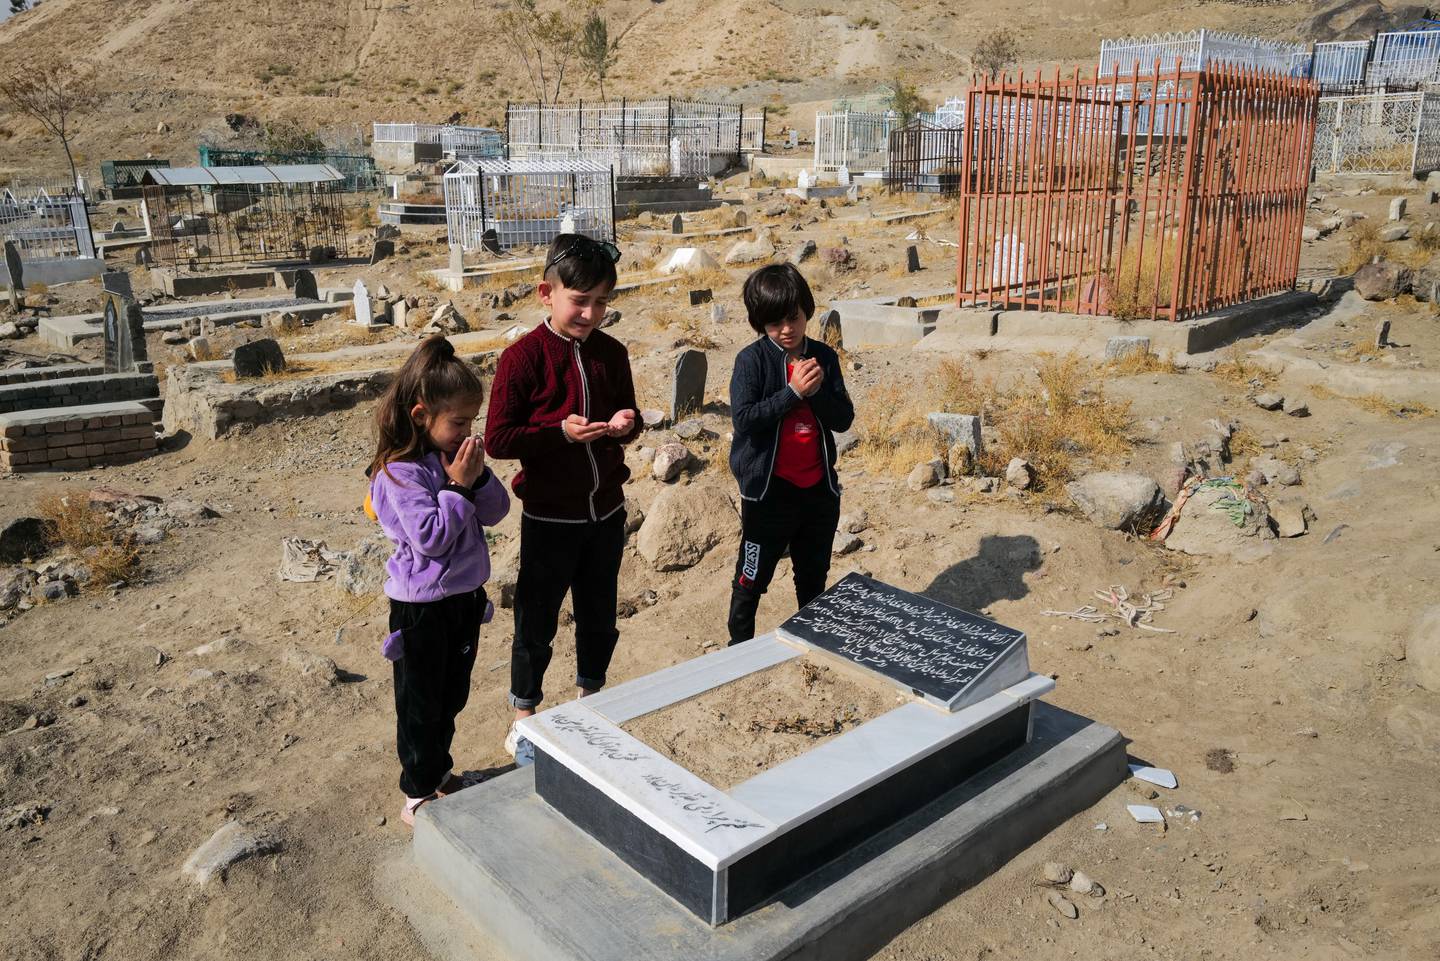 Ada Ahmadi stands with her cousins as they pray by the grave of their relative Farzad, who was a victim of a US drone strike that killed 10 civilians, including seven children, in Kabul, Afghanistan, on November 7, 2021. Reuters